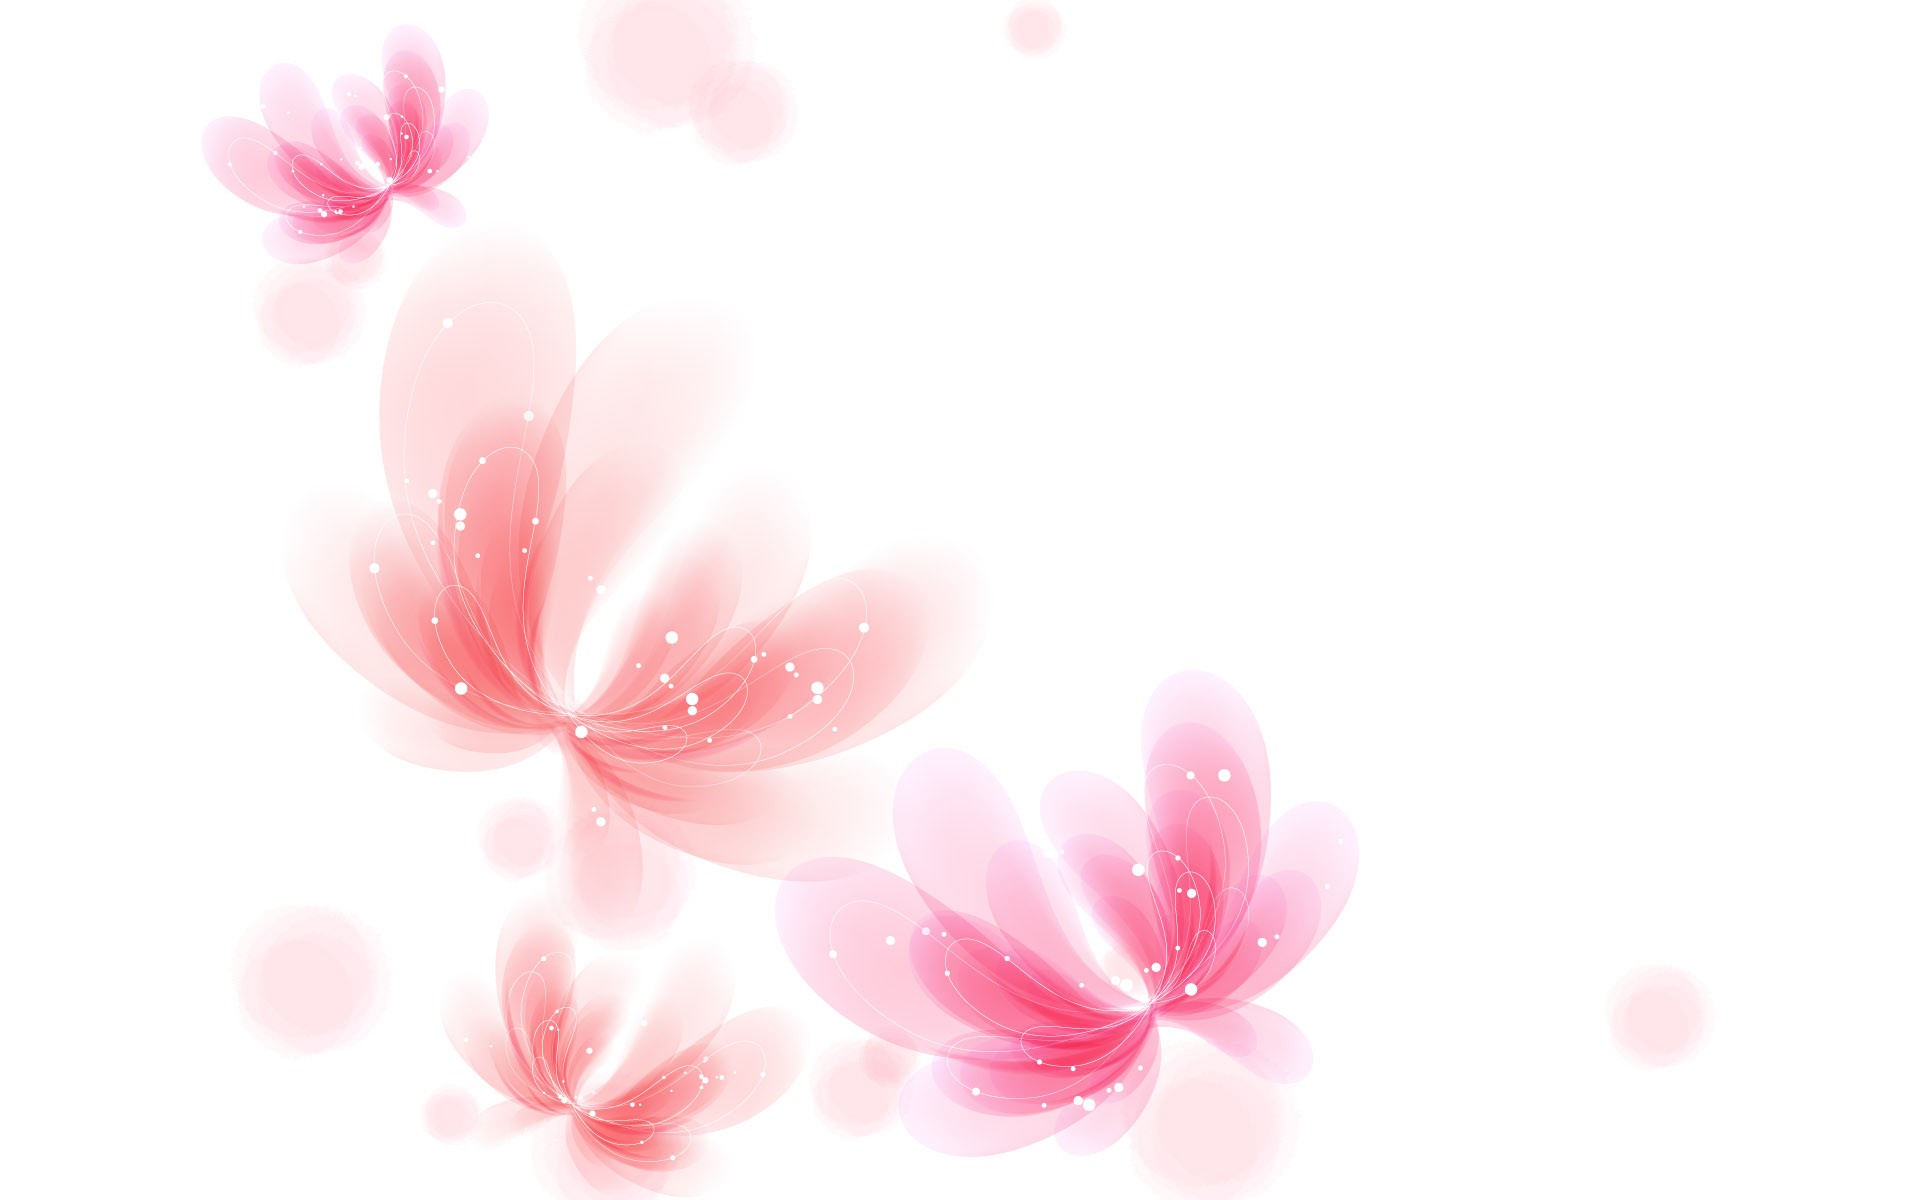 69+] Pink And White Backgrounds - WallpaperSafari